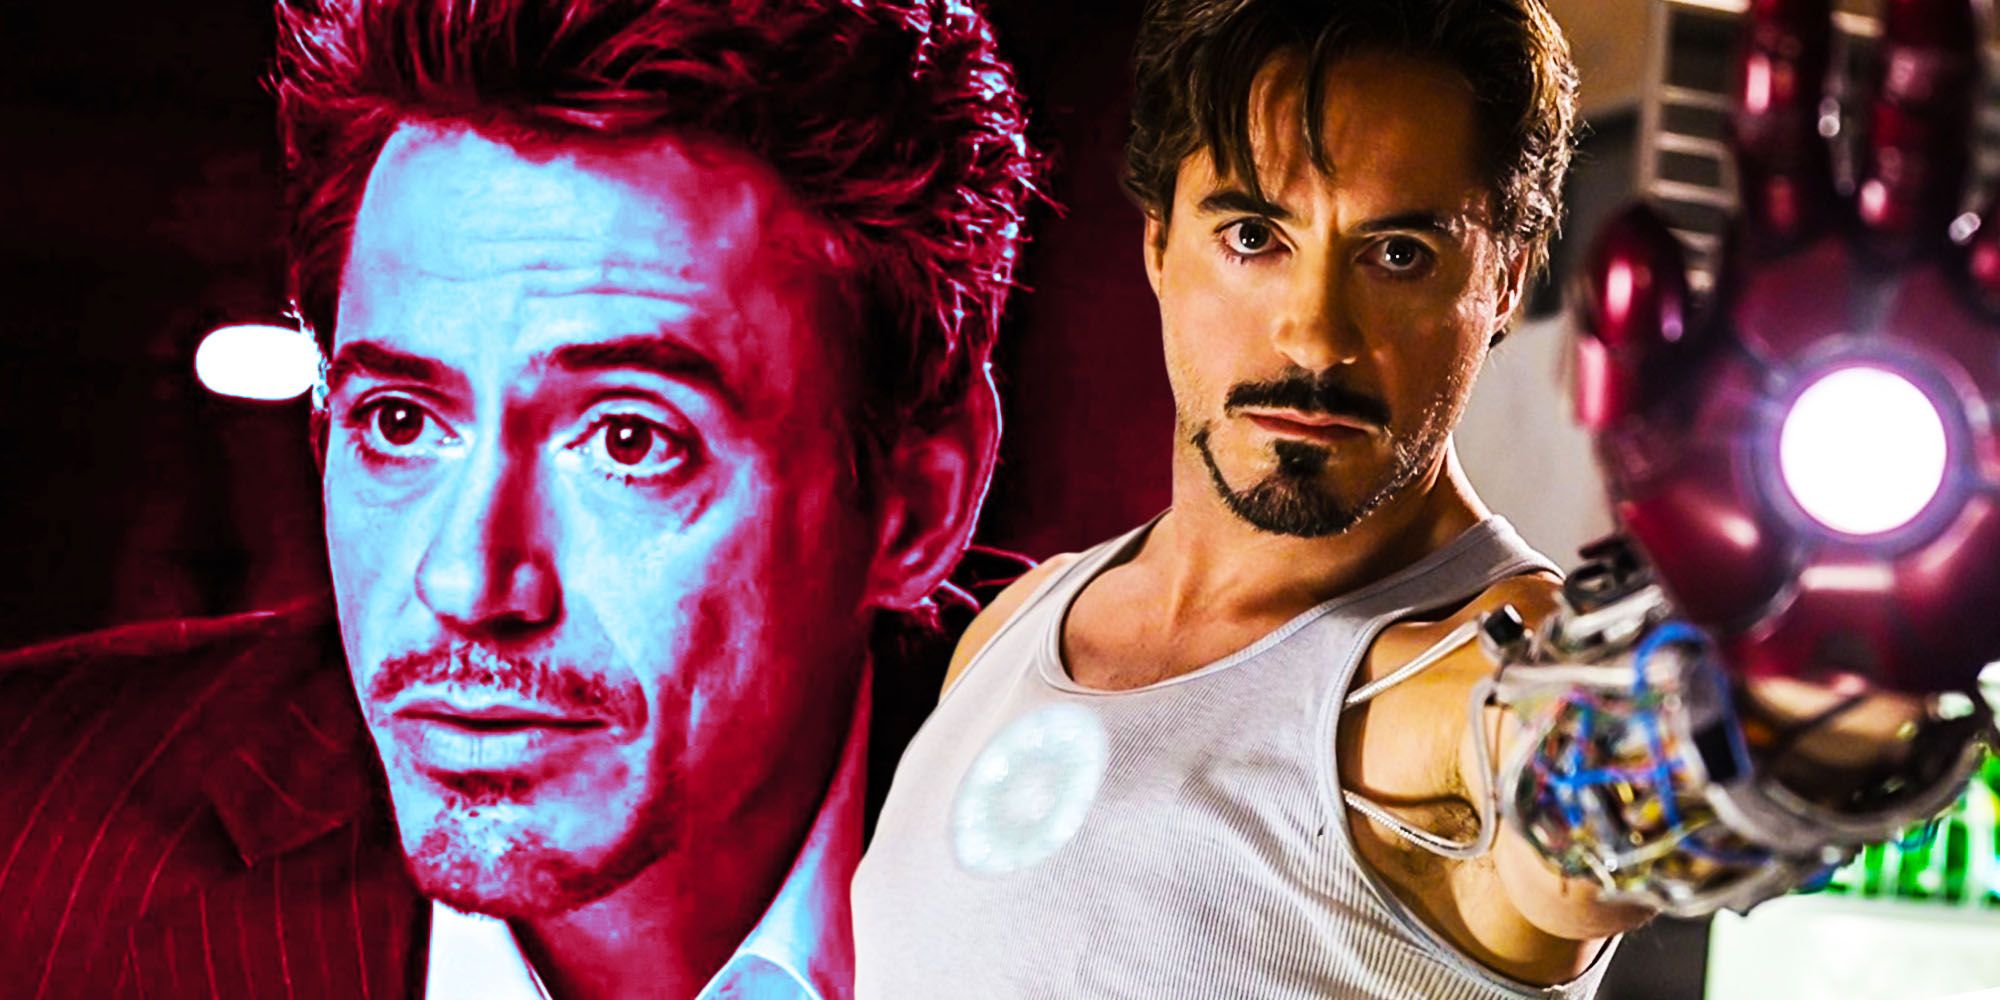 Iron Man Why Marvel Didn't Want To Cast Robert Downey Jr.